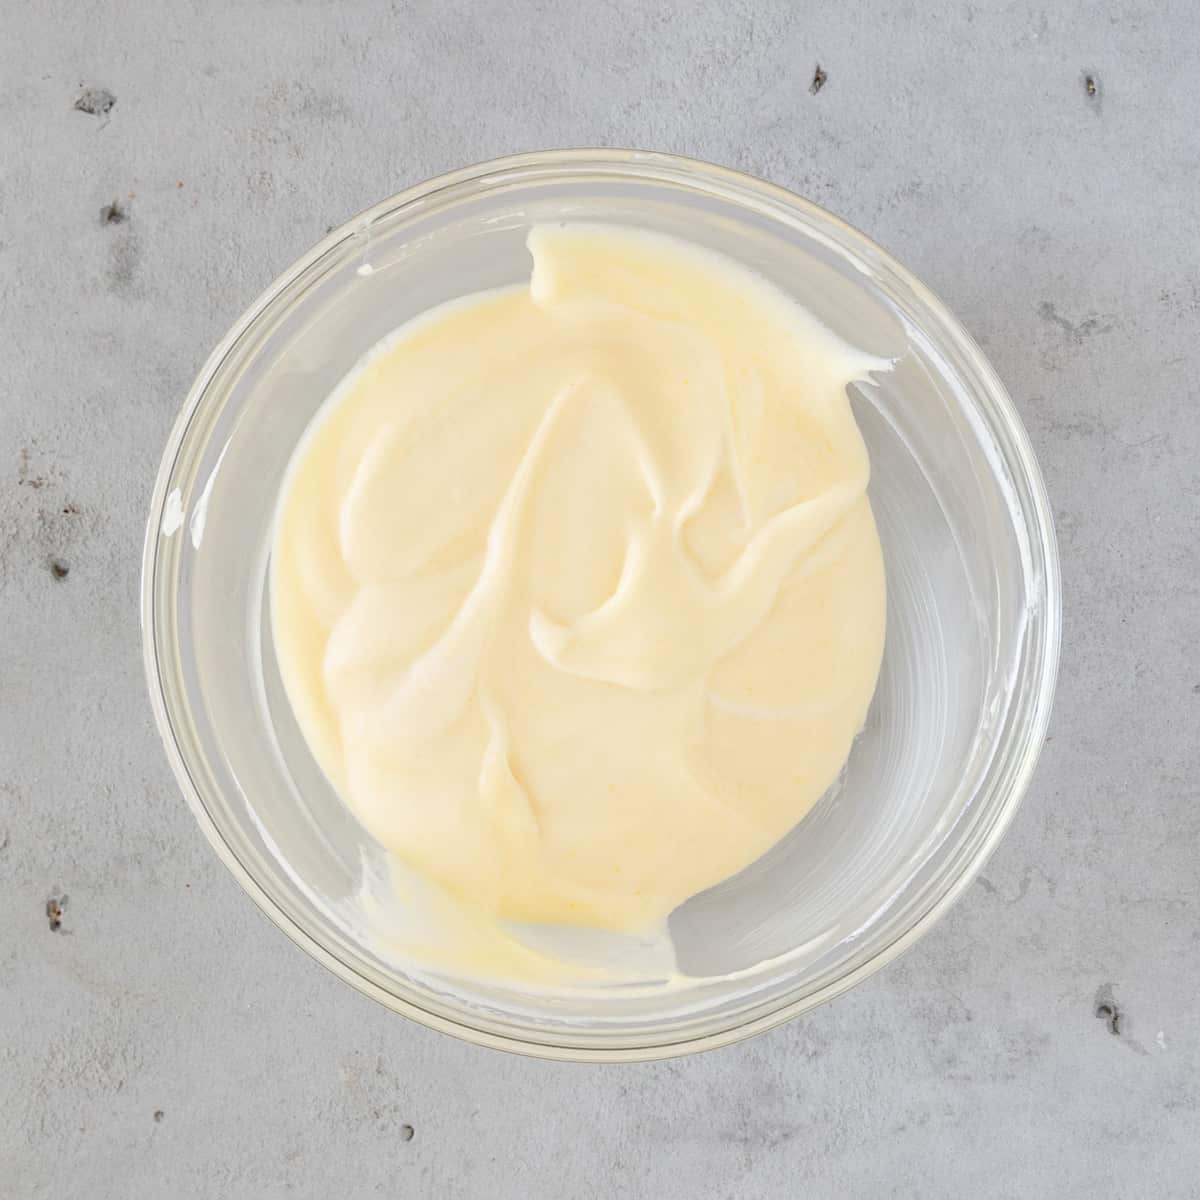 the whipped cream and lime curd combined in a glass bowl on a grey background.